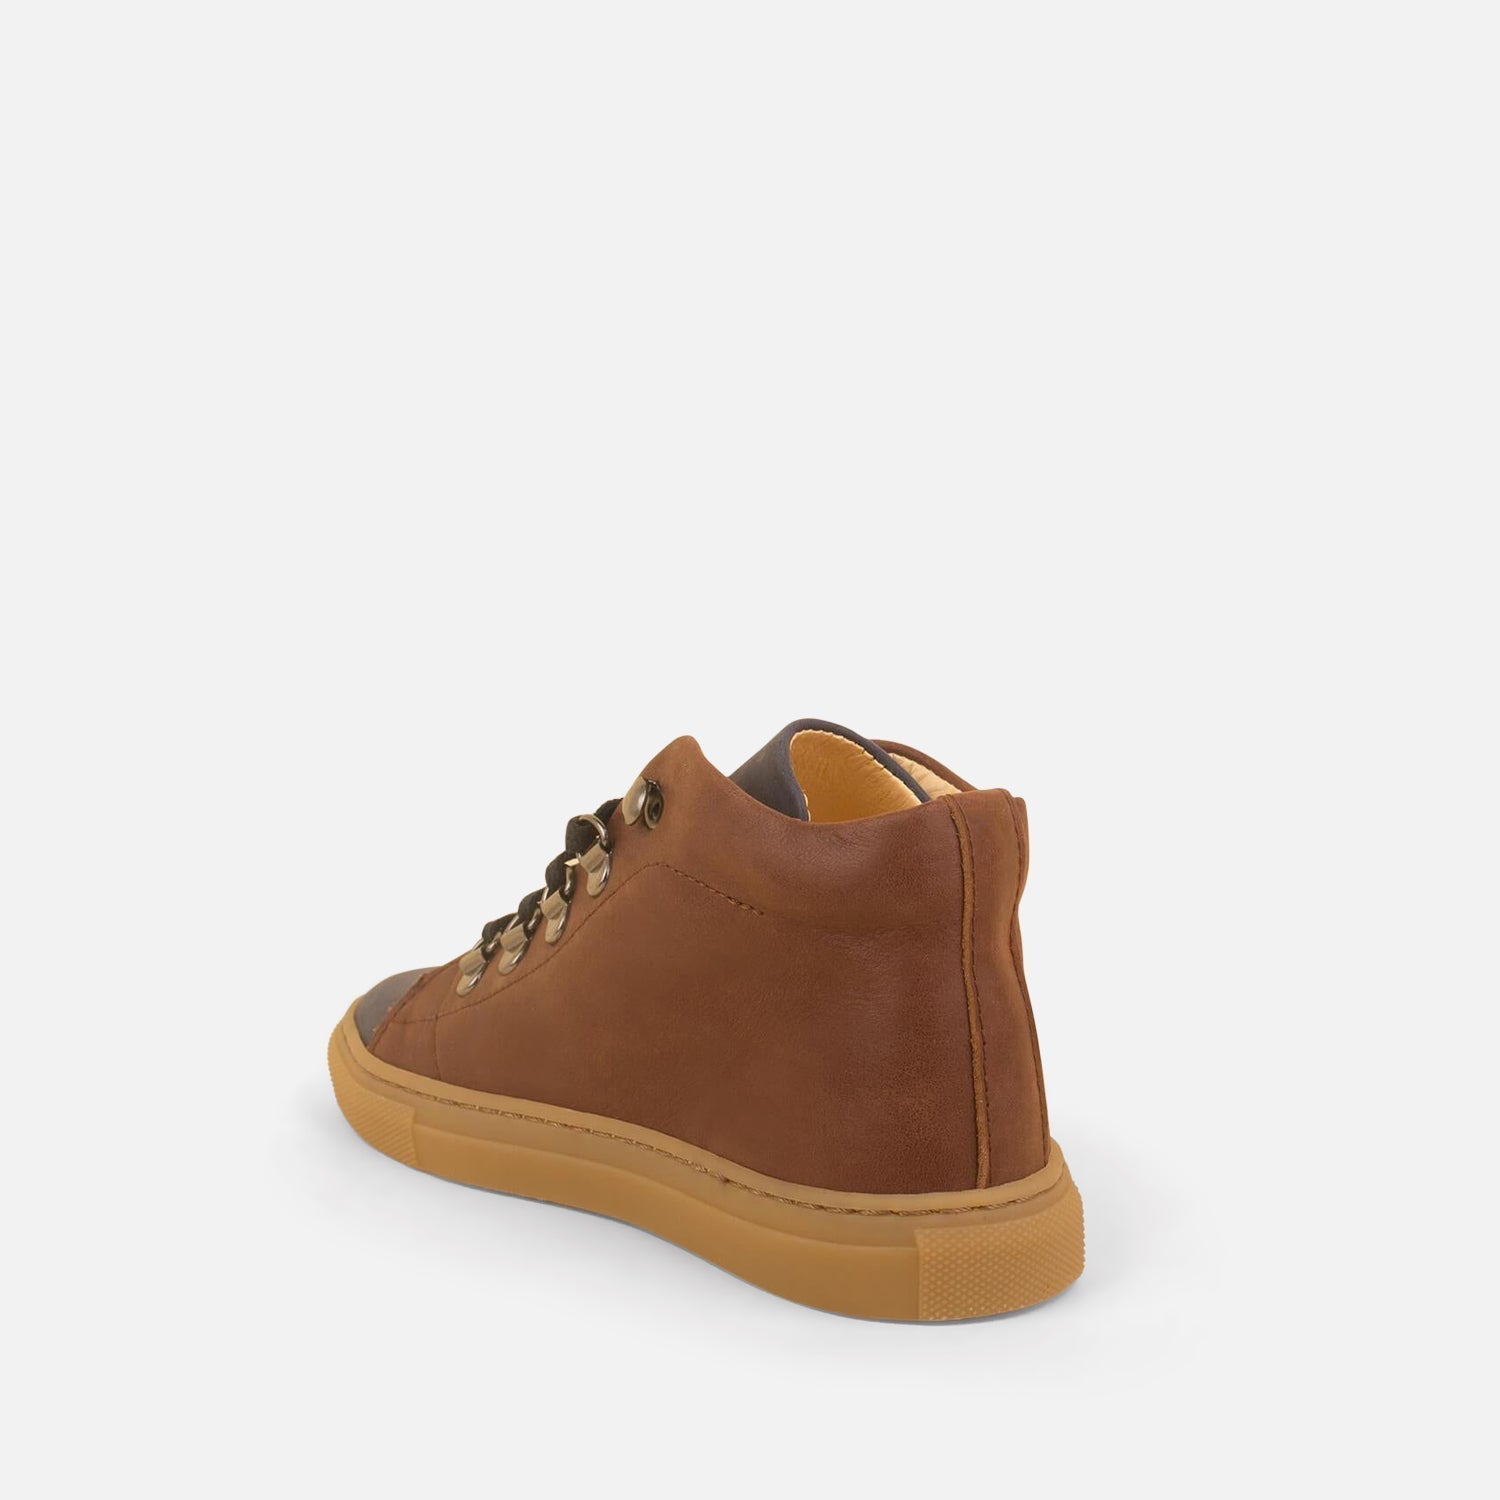 Navy/Brown Mid Sneakers Shoes Dulis Shoes 